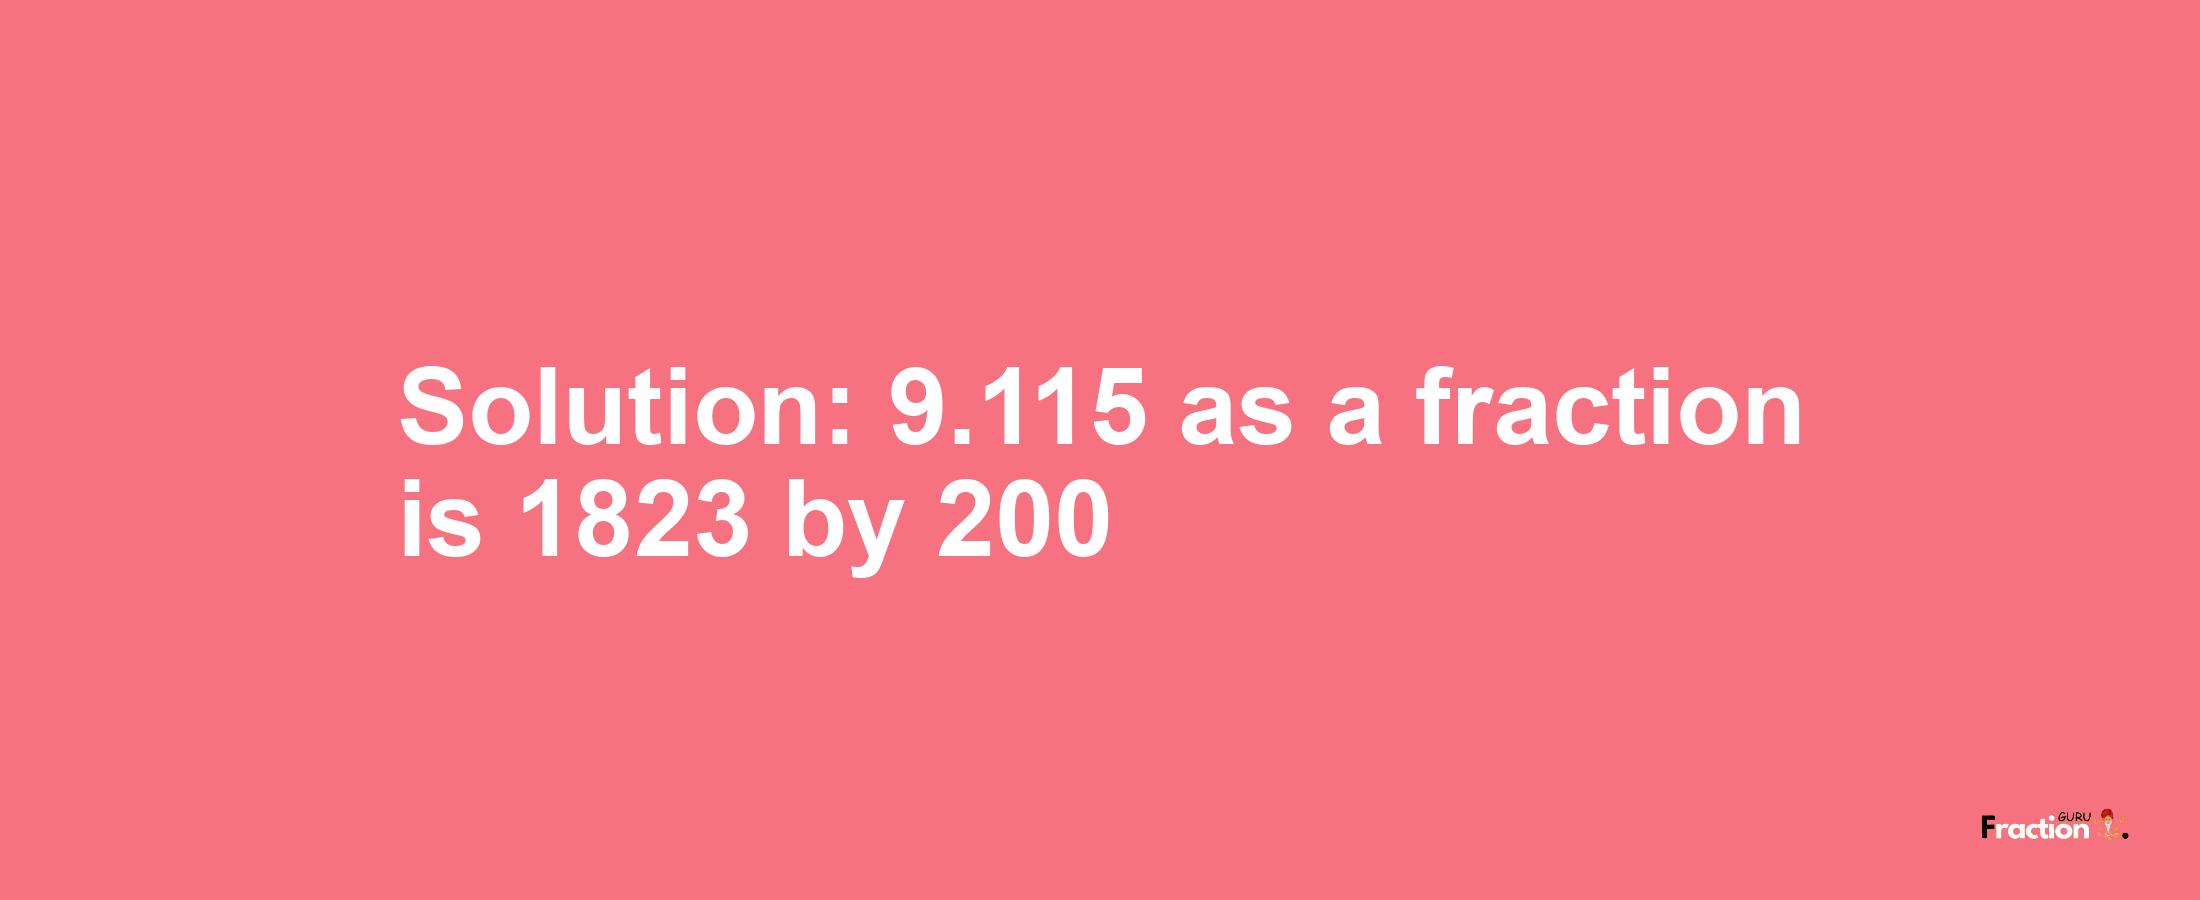 Solution:9.115 as a fraction is 1823/200